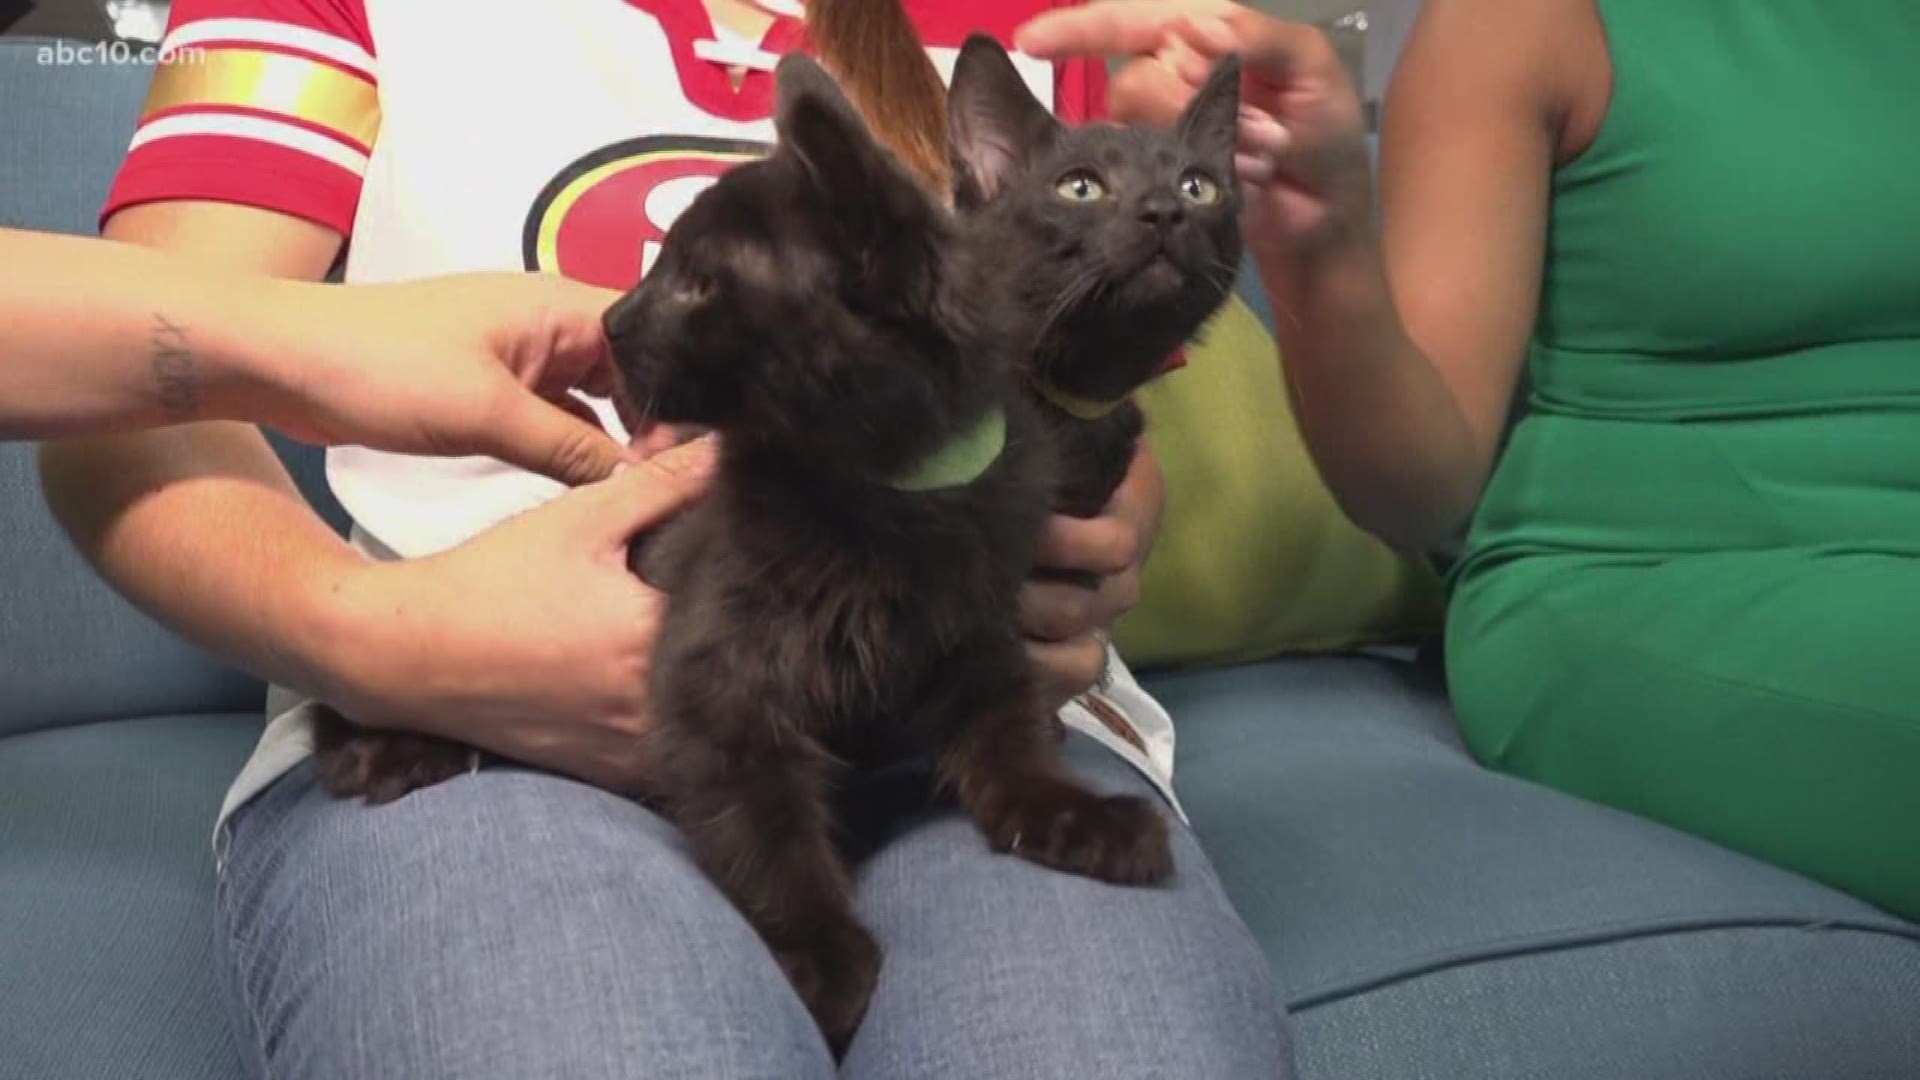 It's Friday, which means it's time for Morning Blend's pet of the week.